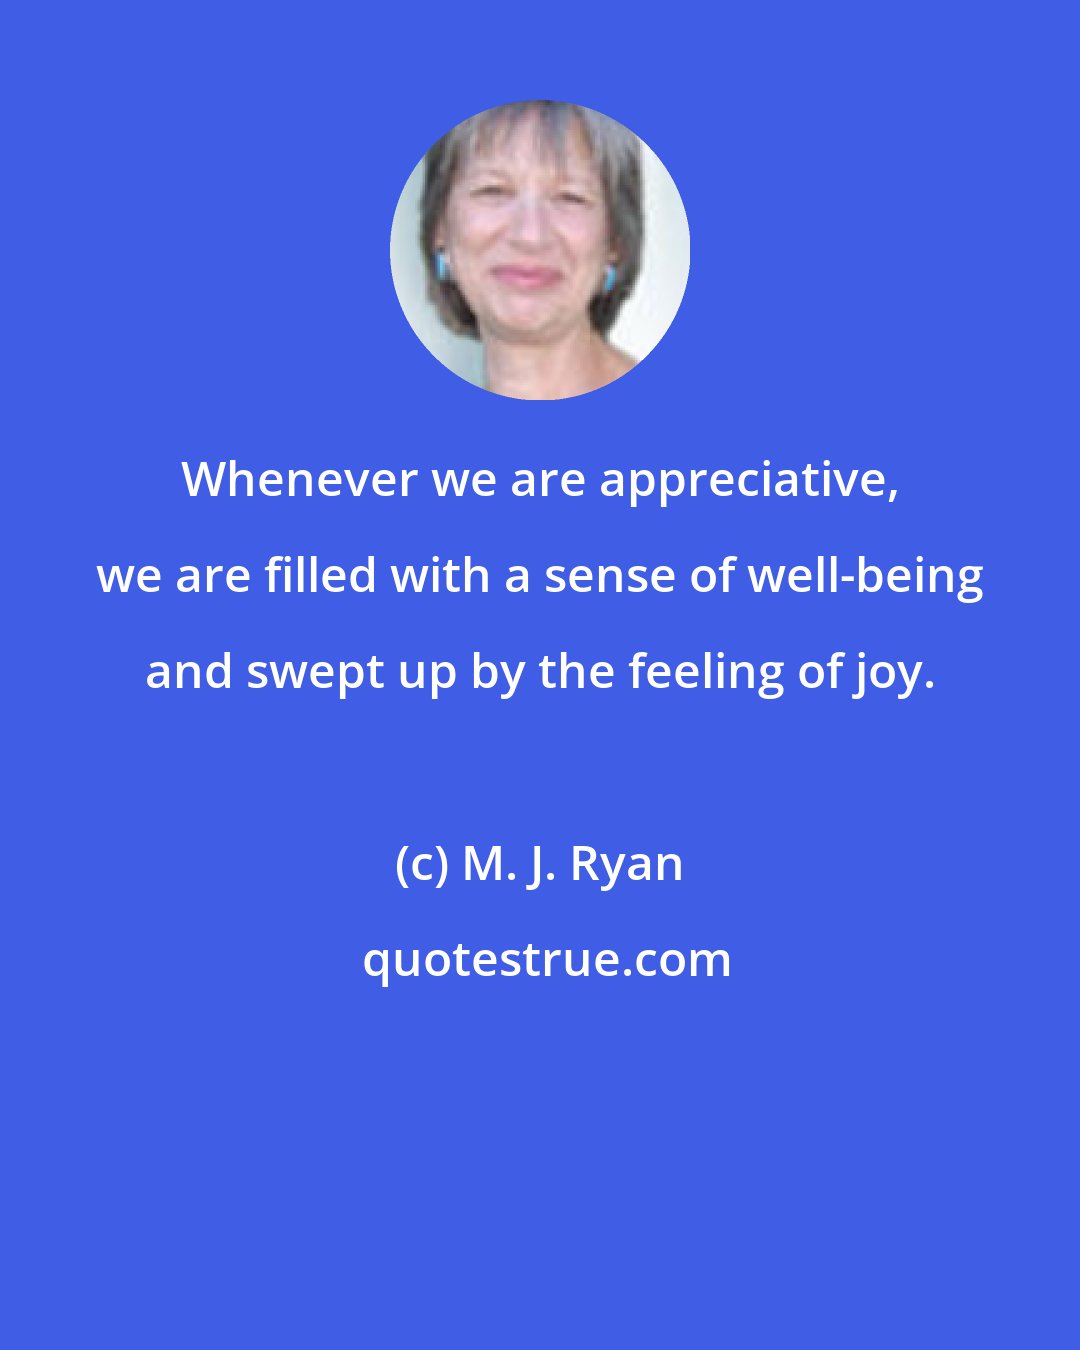 M. J. Ryan: Whenever we are appreciative, we are filled with a sense of well-being and swept up by the feeling of joy.